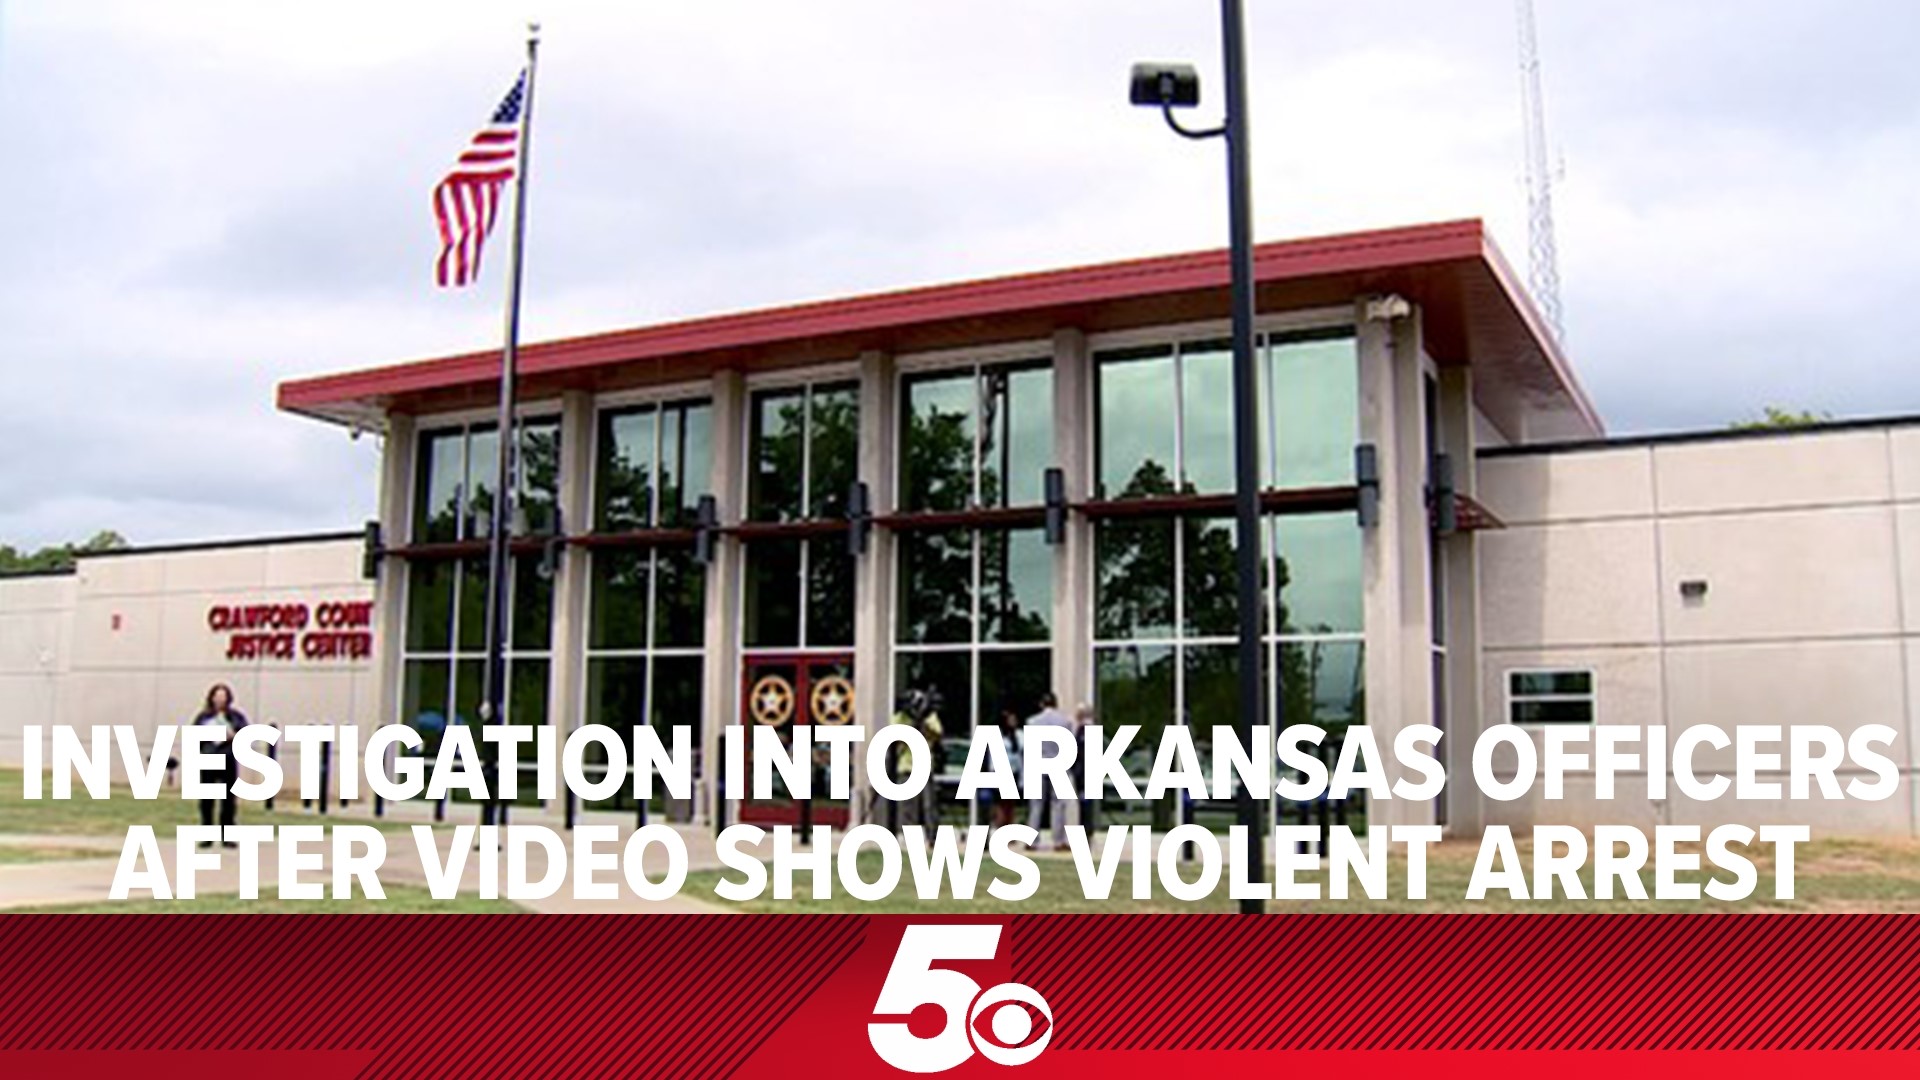 The public is calling for answers after three Arkansas law enforcement officers are seen on a video beating a man during an arrest in Mulberry, Arkansas.